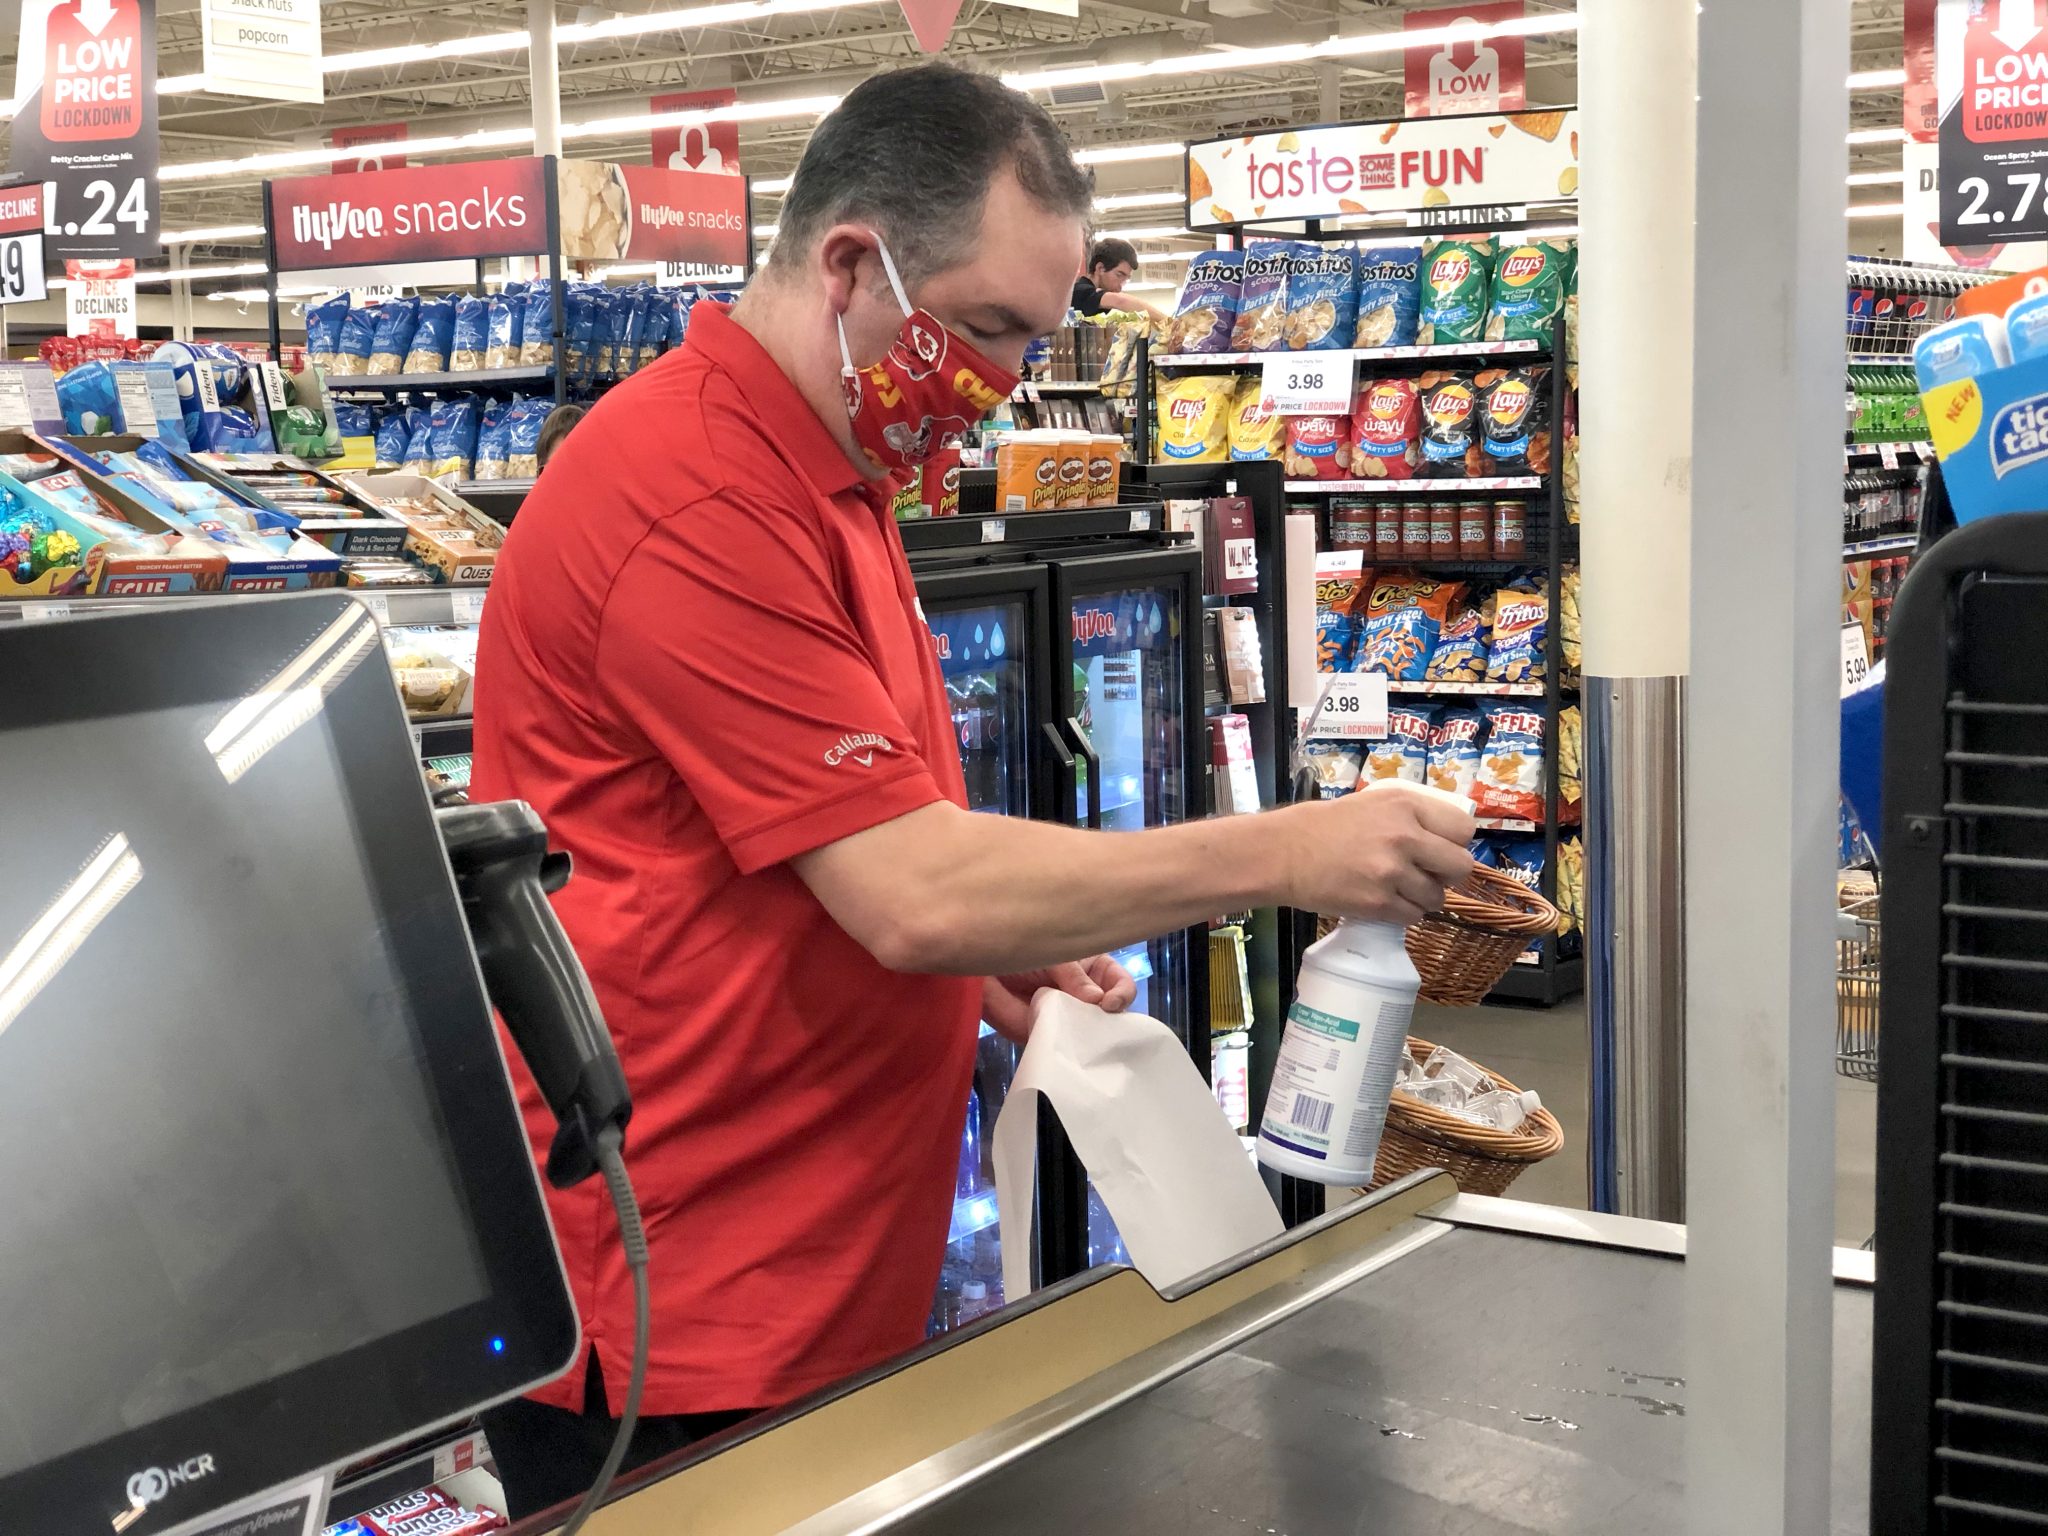 HyVee requires employees to wear masks in response to COVID19